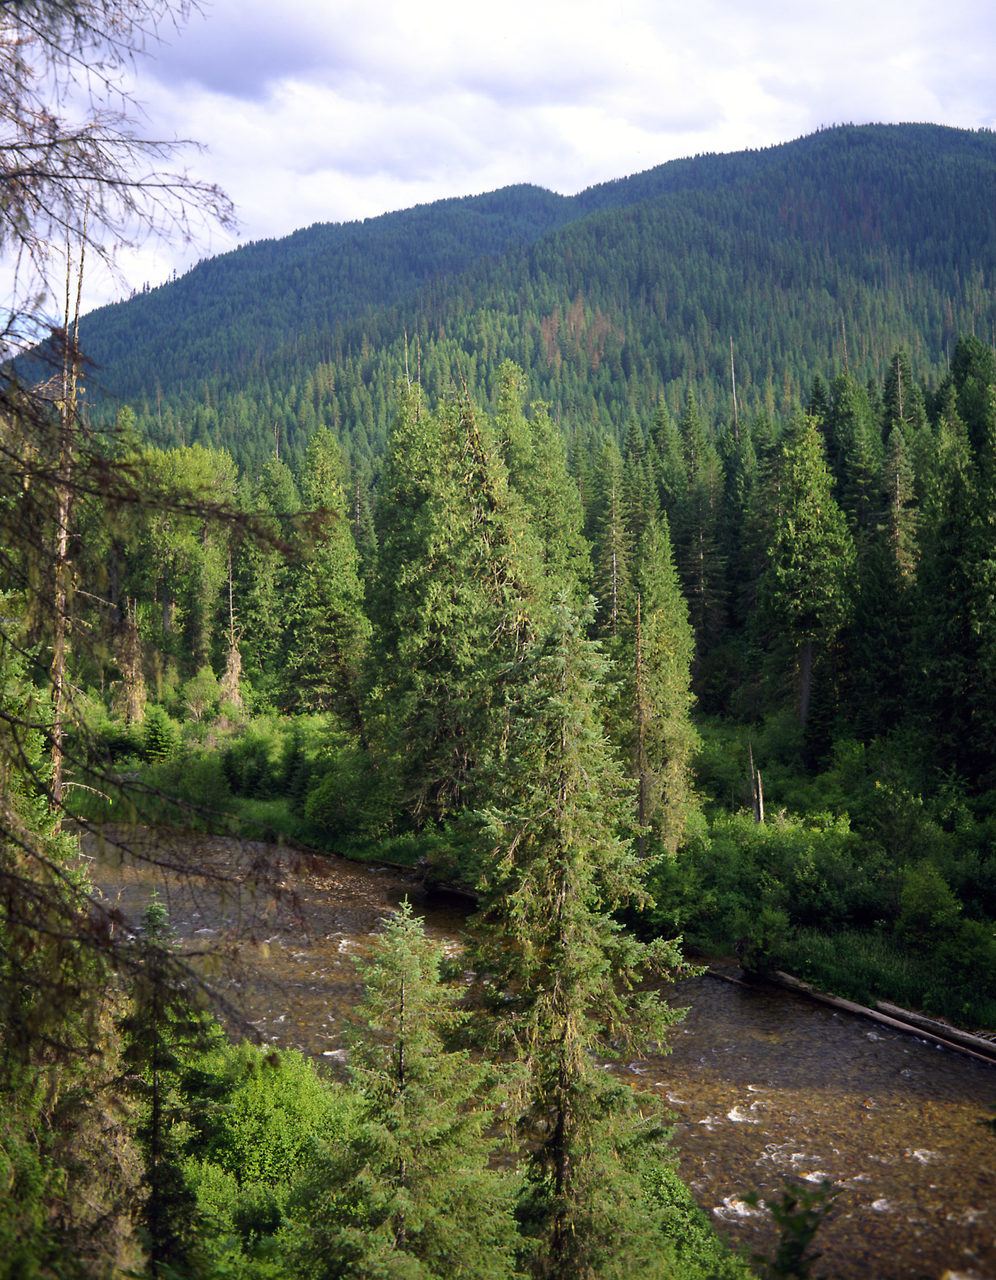 Urgent public comments needed by 28 Feb – Protect the Nez Perce-Clearwater National Forests